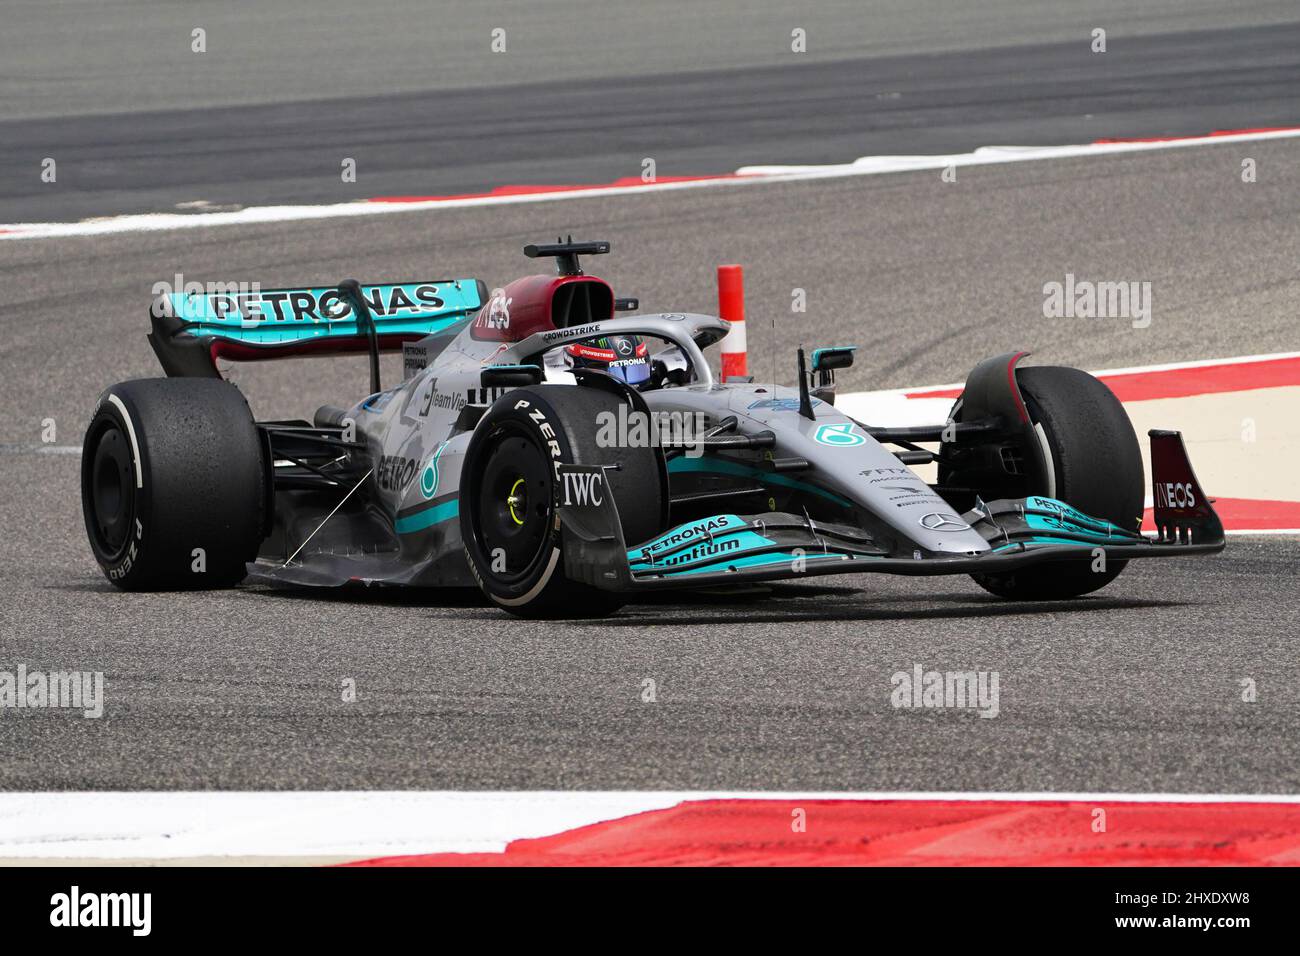 Bahrain International Circuit, Sakhir, Bahrain on 11 March 2022  George Russell 63 (GBR), Mercedes W13 during Day 2 FORMULA 1 ARAMCO PRE-SEASON TESTING 2022 Eleanor Hoad Credit: Every Second Media/Alamy Live News Stock Photo